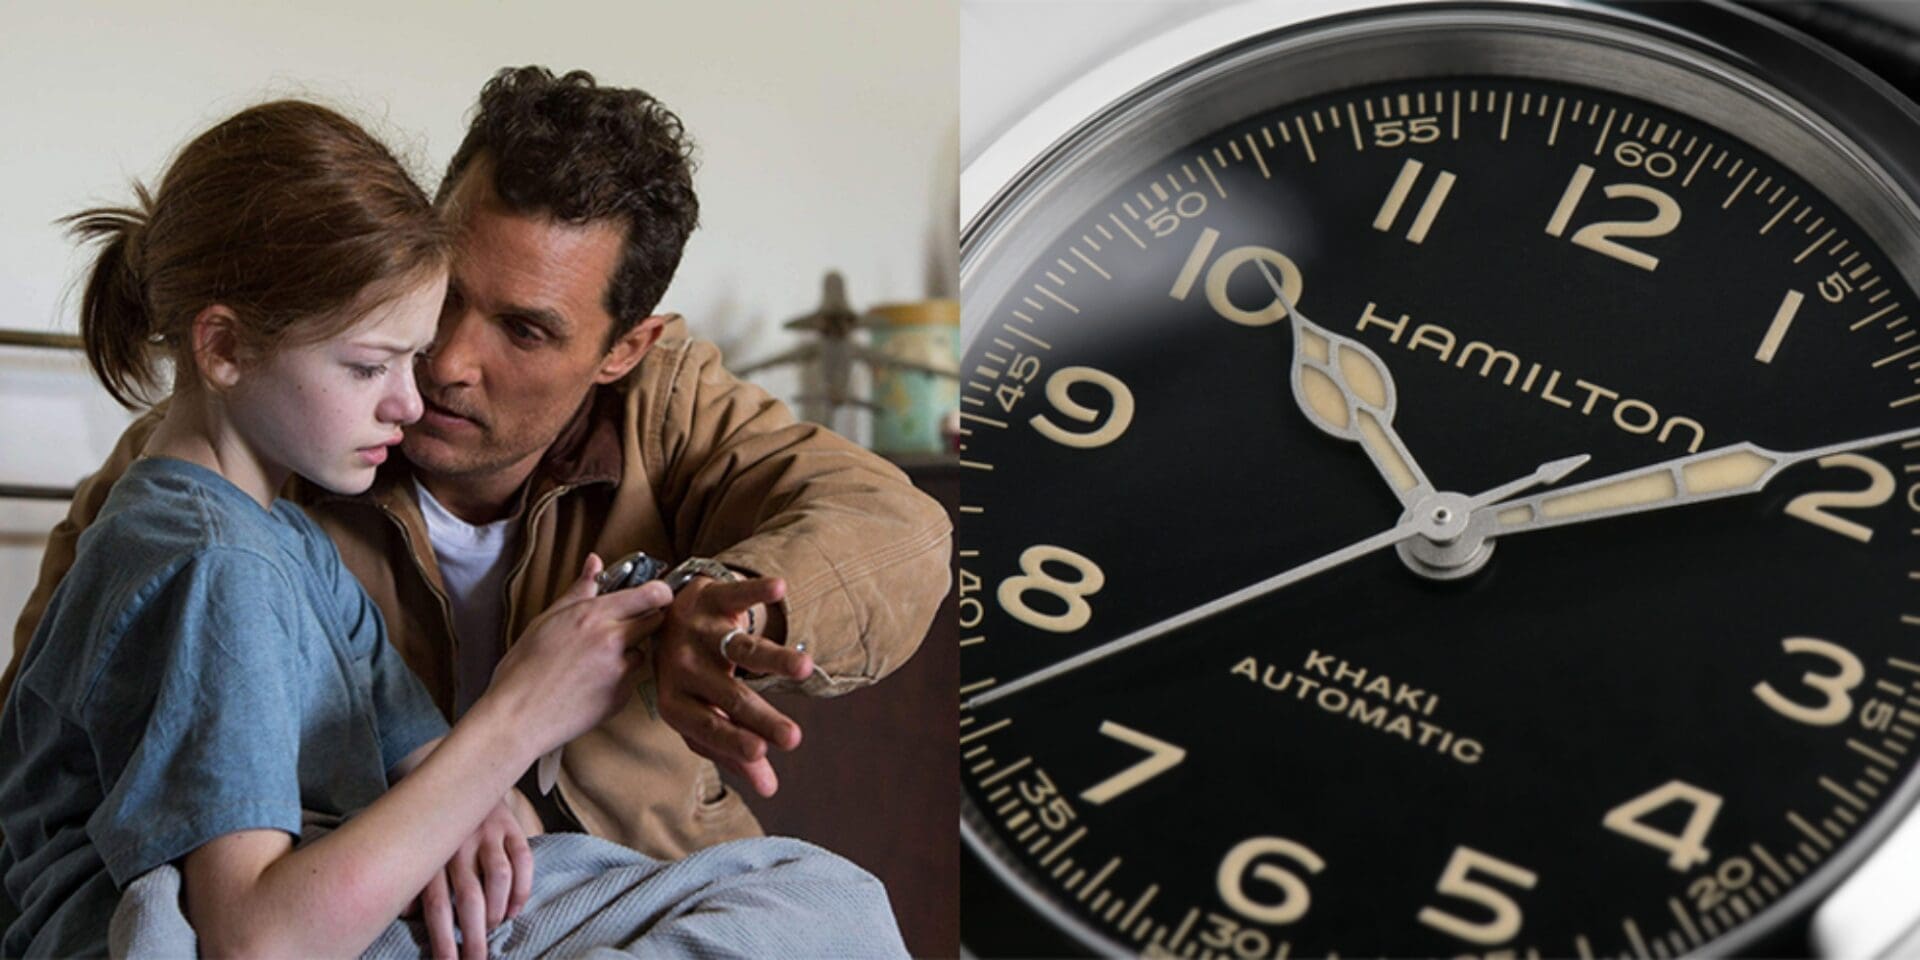 THE IMMORTALS – The Hamilton Murph is a wrist-bound movie star in its own right